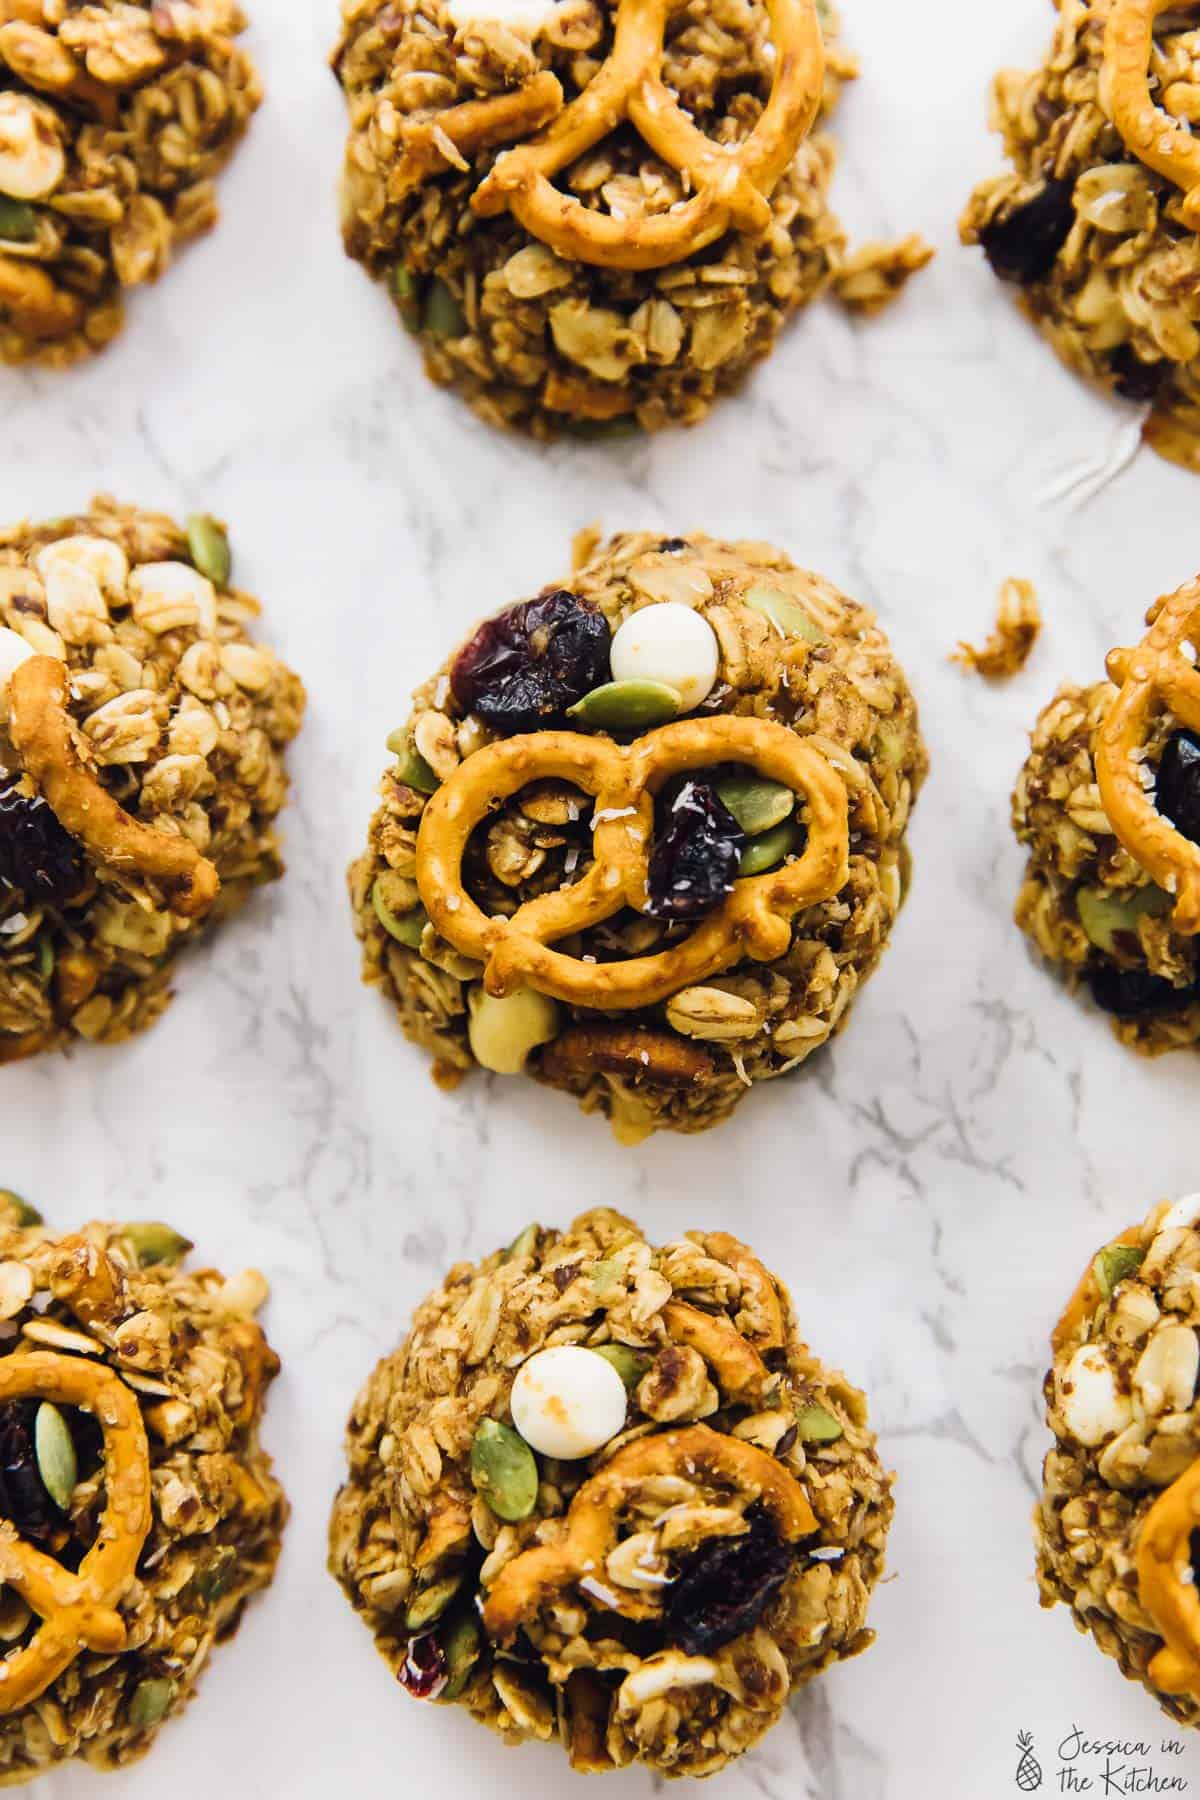 Overhead view of peanut butter banana oatmeal cookies with pretzels